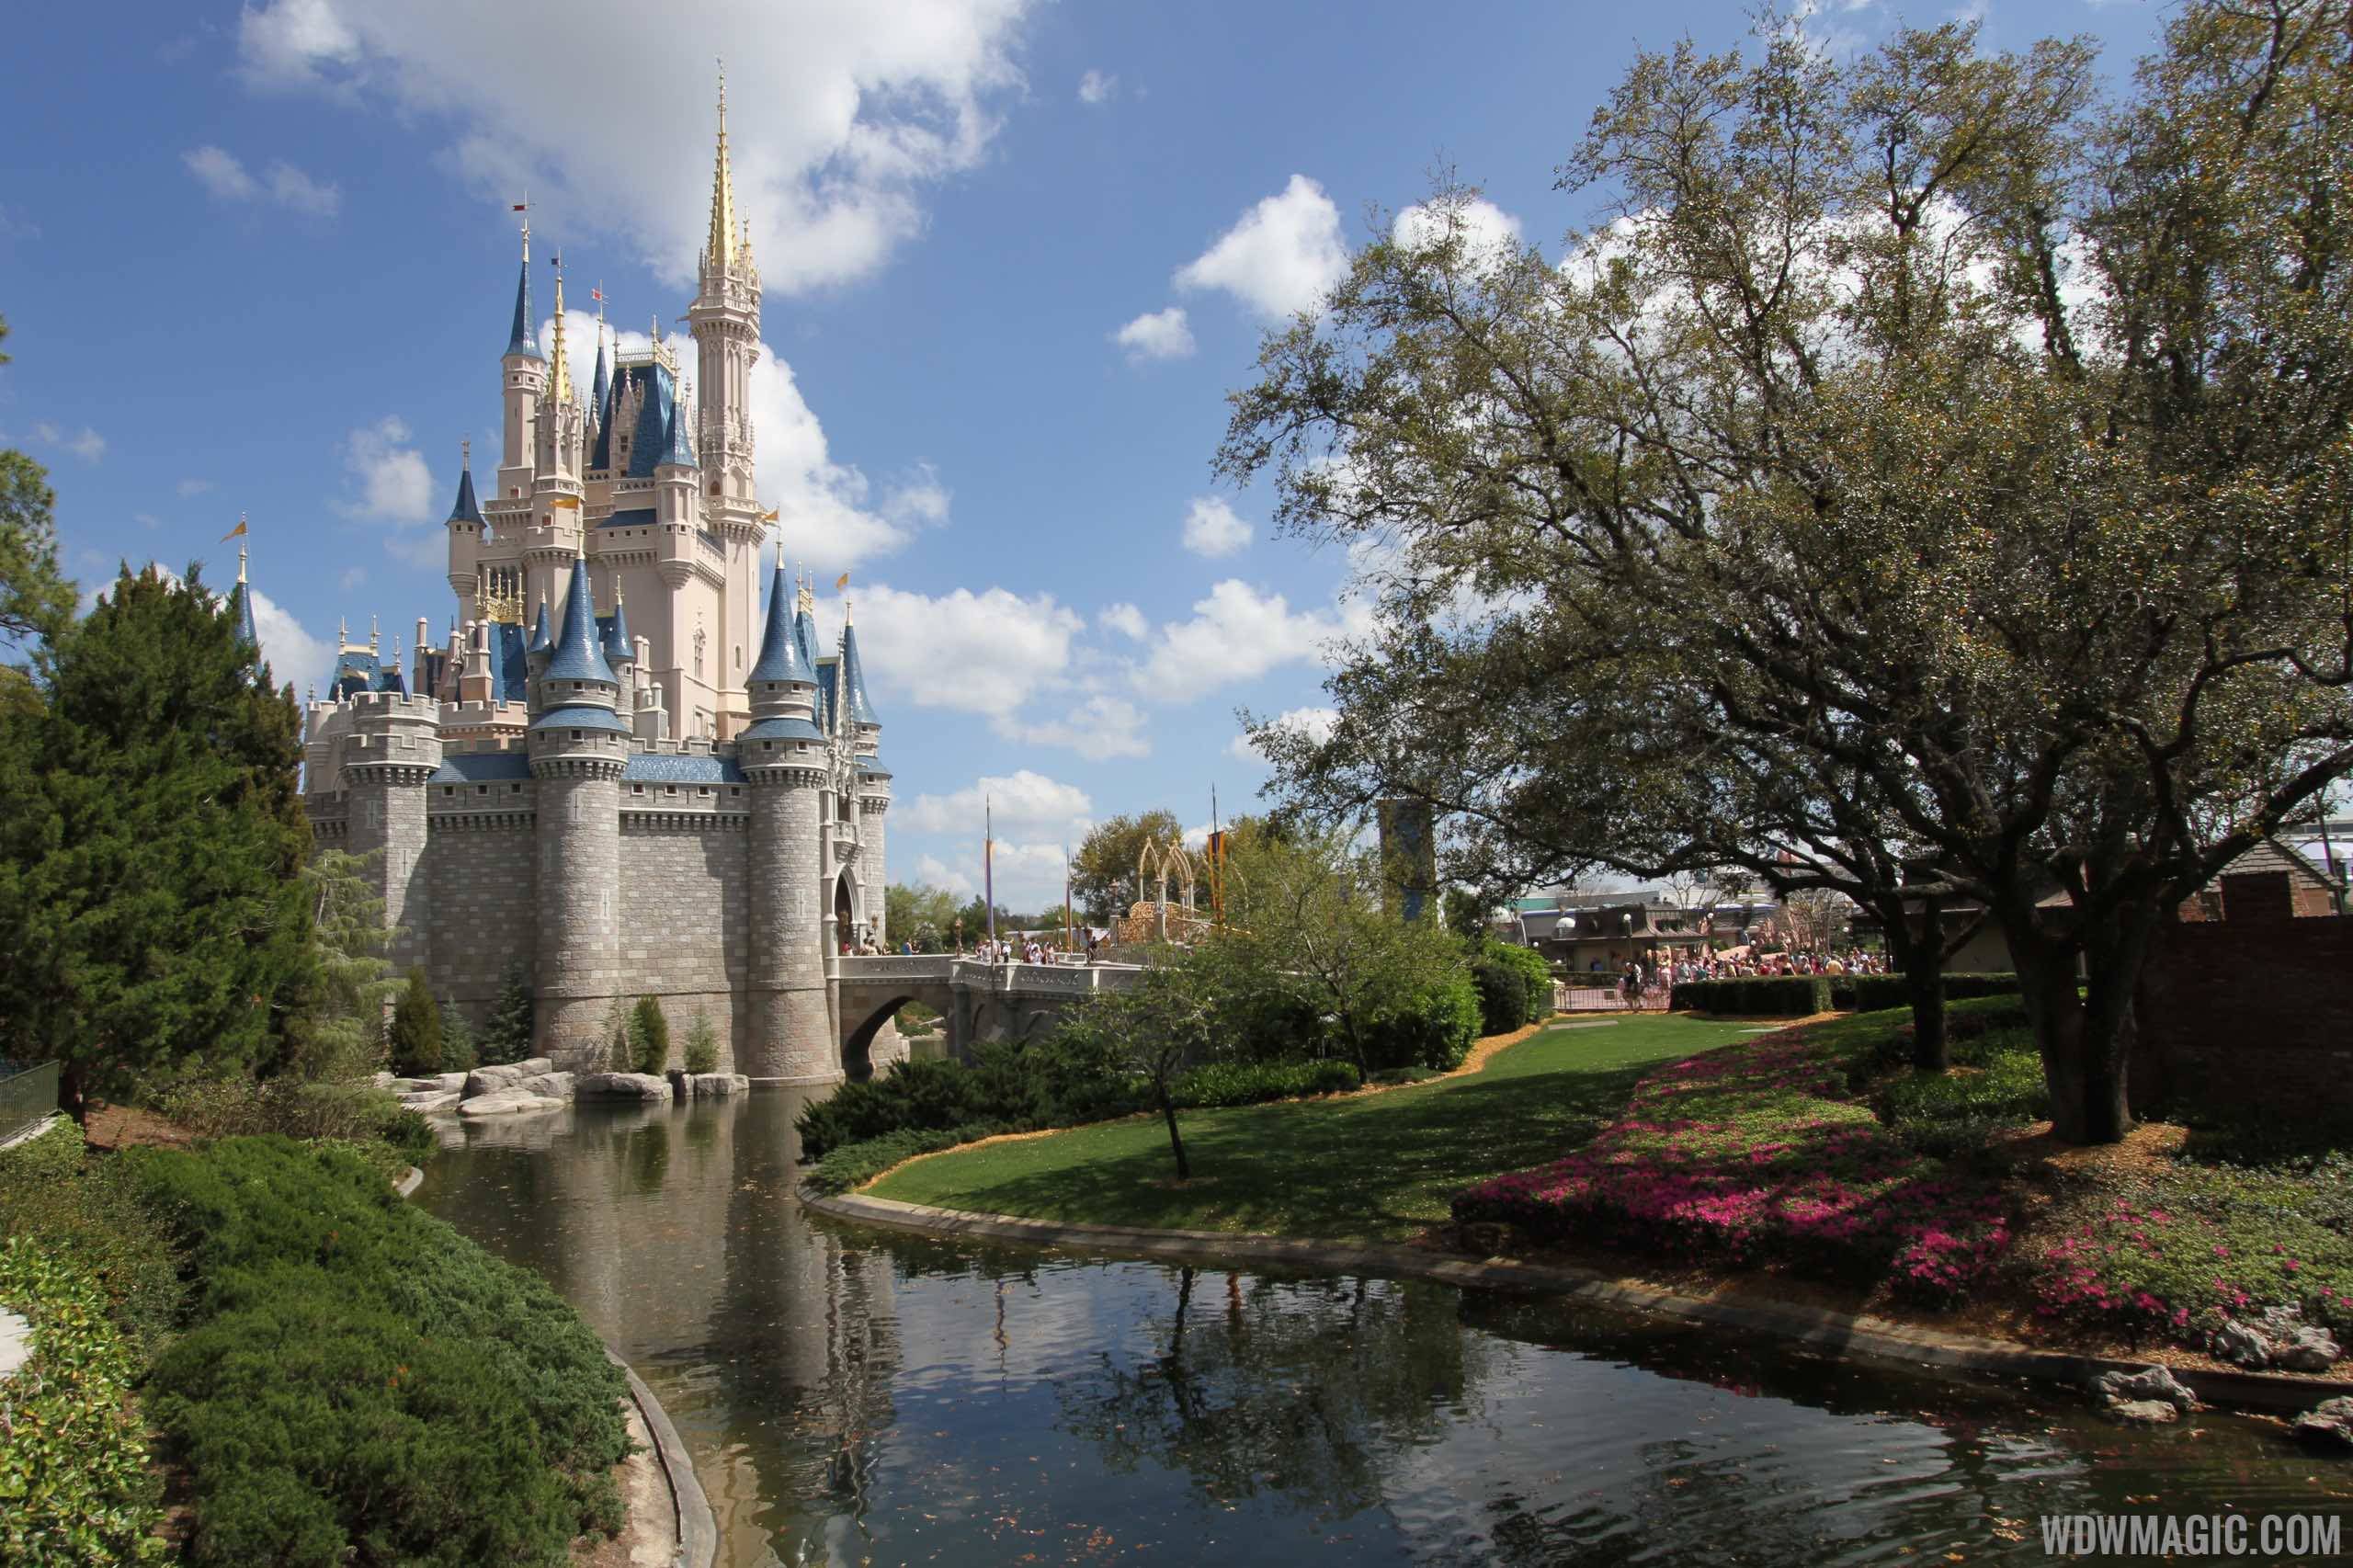 New 'Taste of Magic Kingdom Park VIP Tour' now available for booking